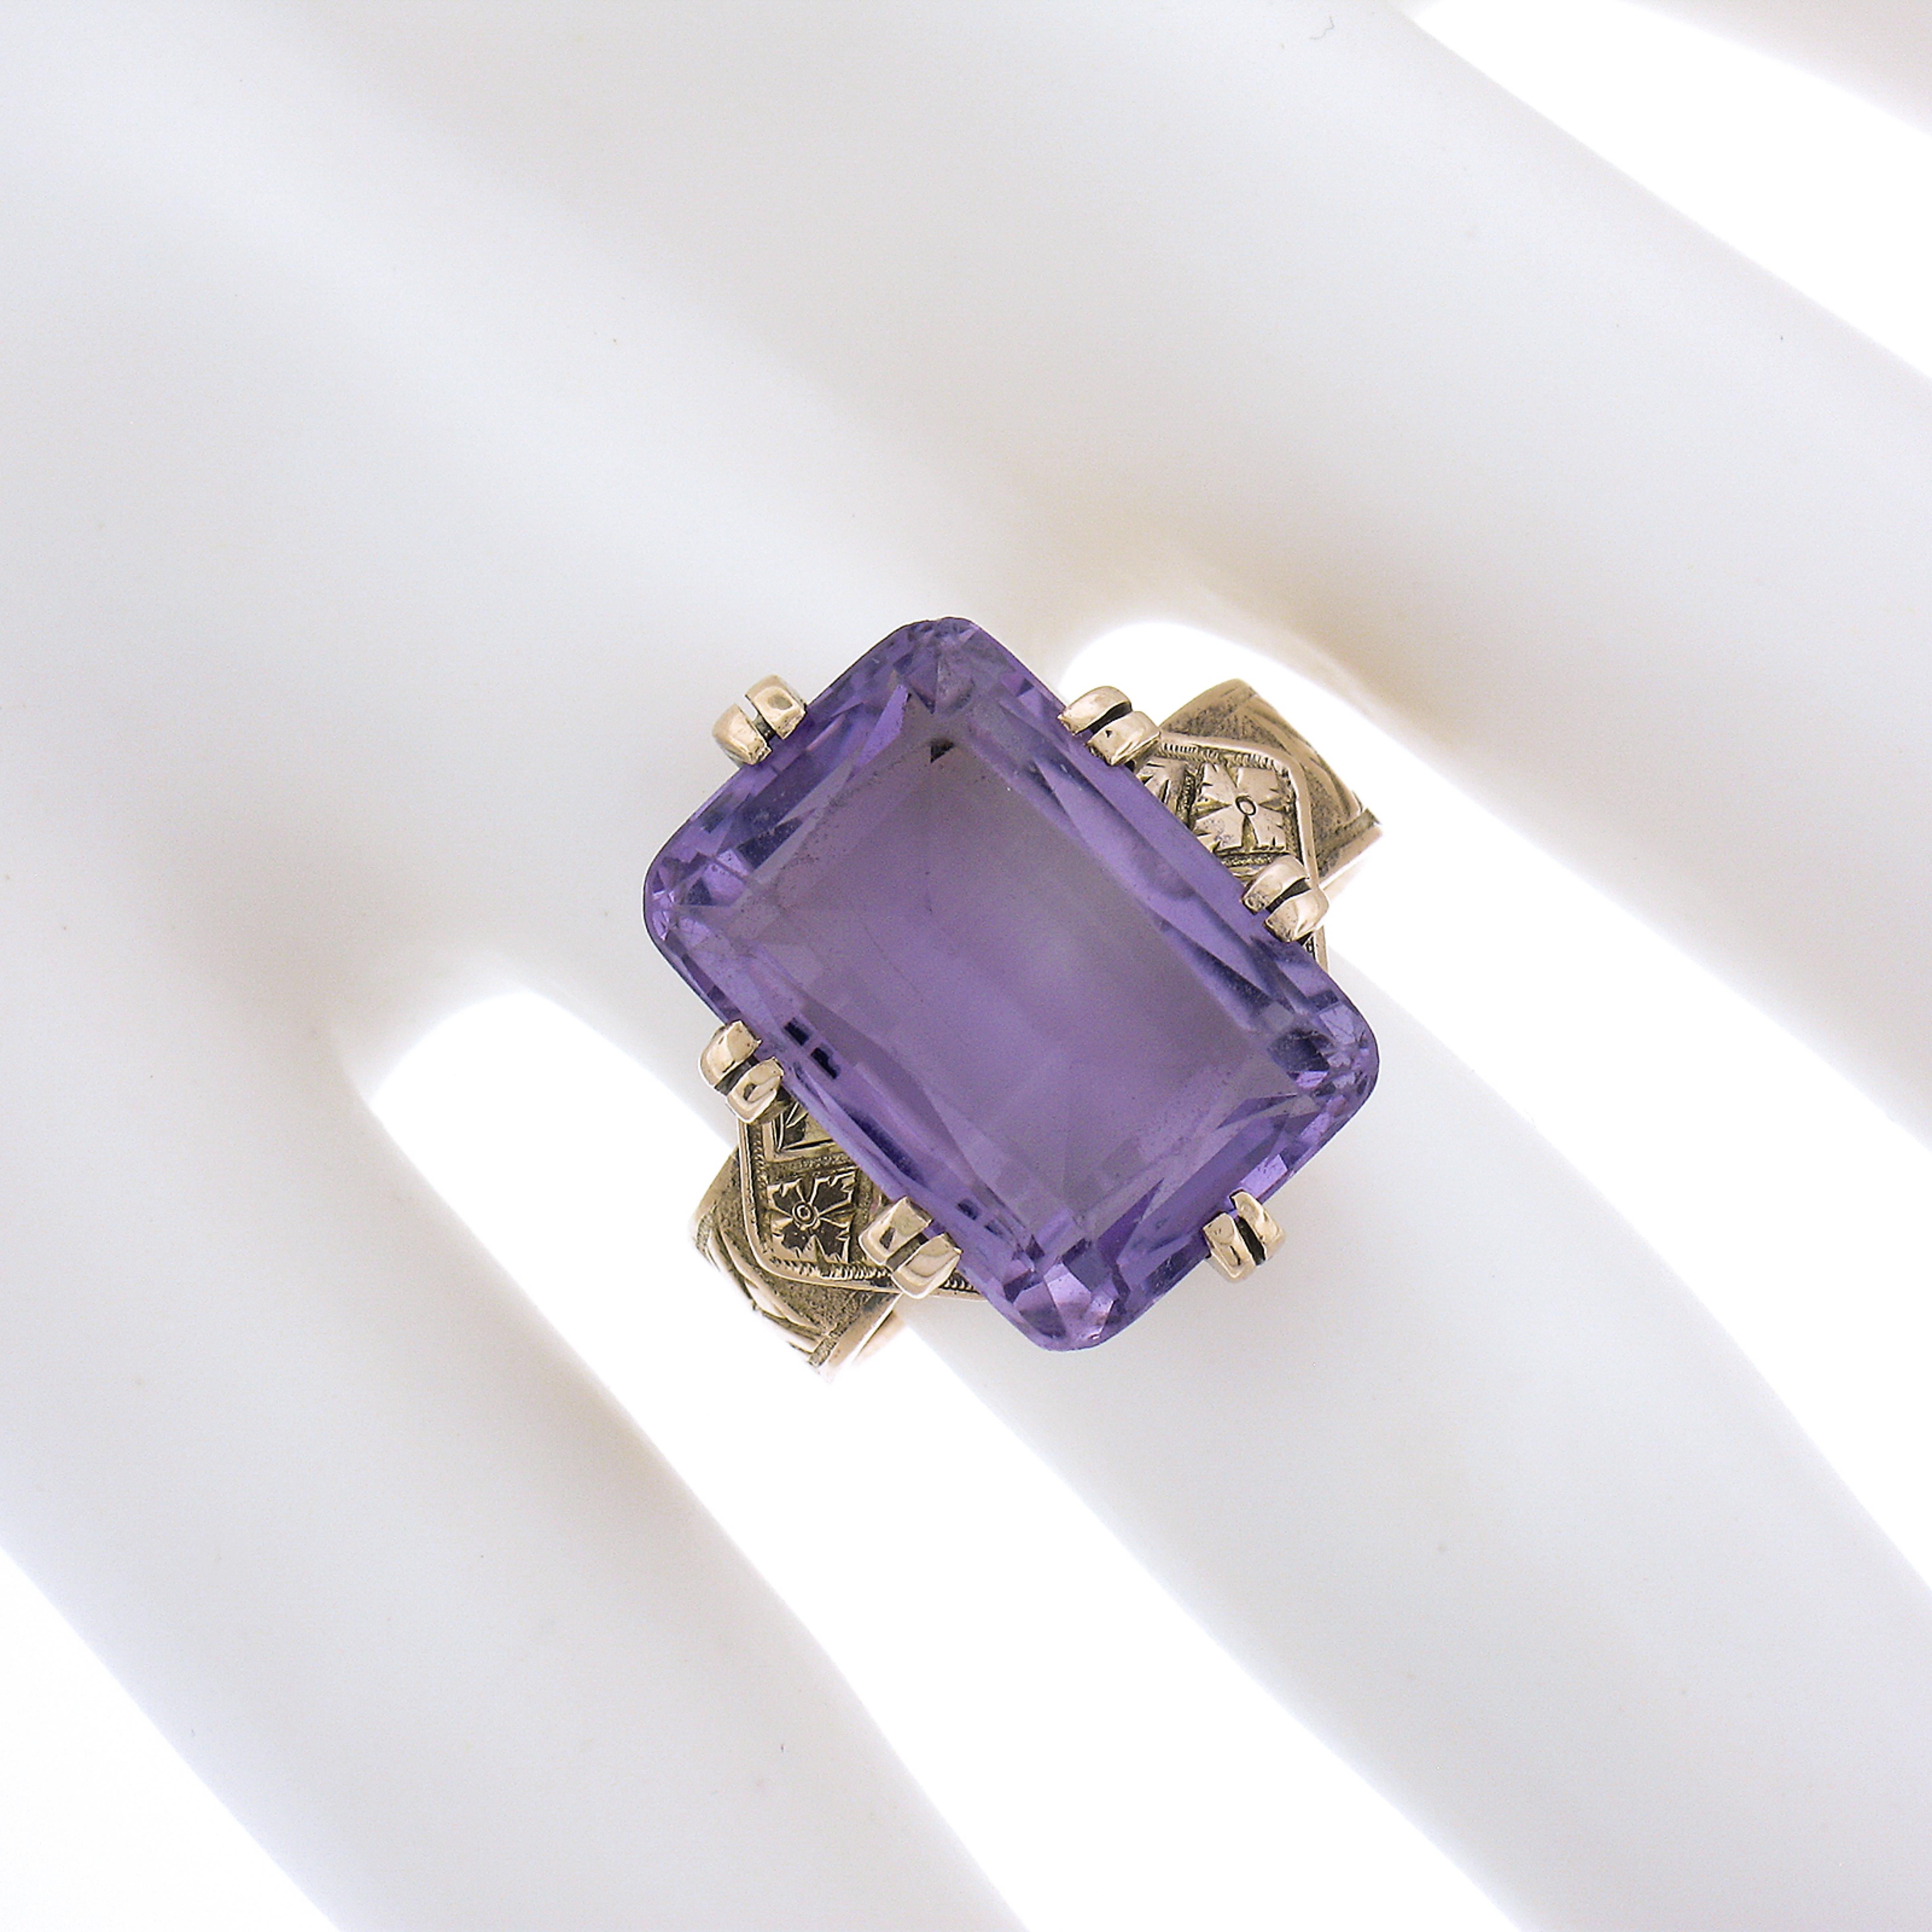 Antique Victorian 10K Gold Rectangular Cut Amethyst Solitaire Engraved Ring In Excellent Condition For Sale In Montclair, NJ